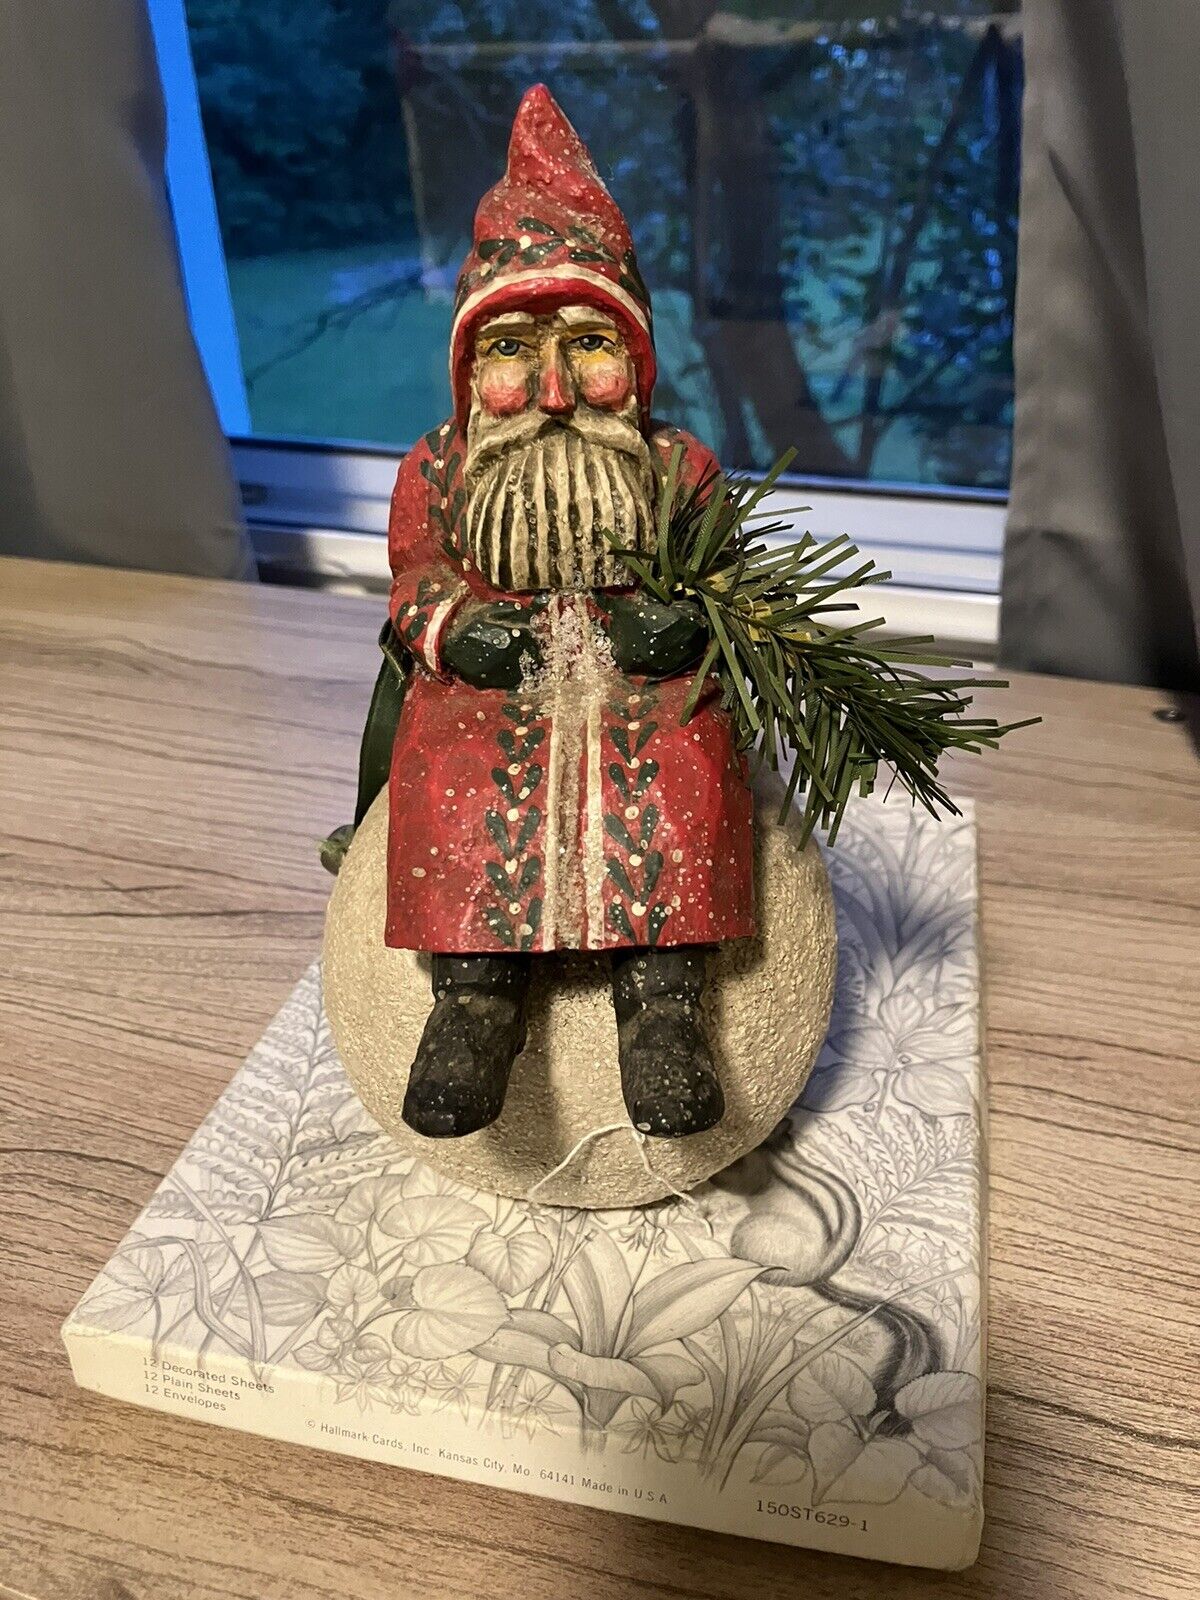 Pam Schifferl Midwest Cannon Falls Old World Santa Claus on Snowball Figurine